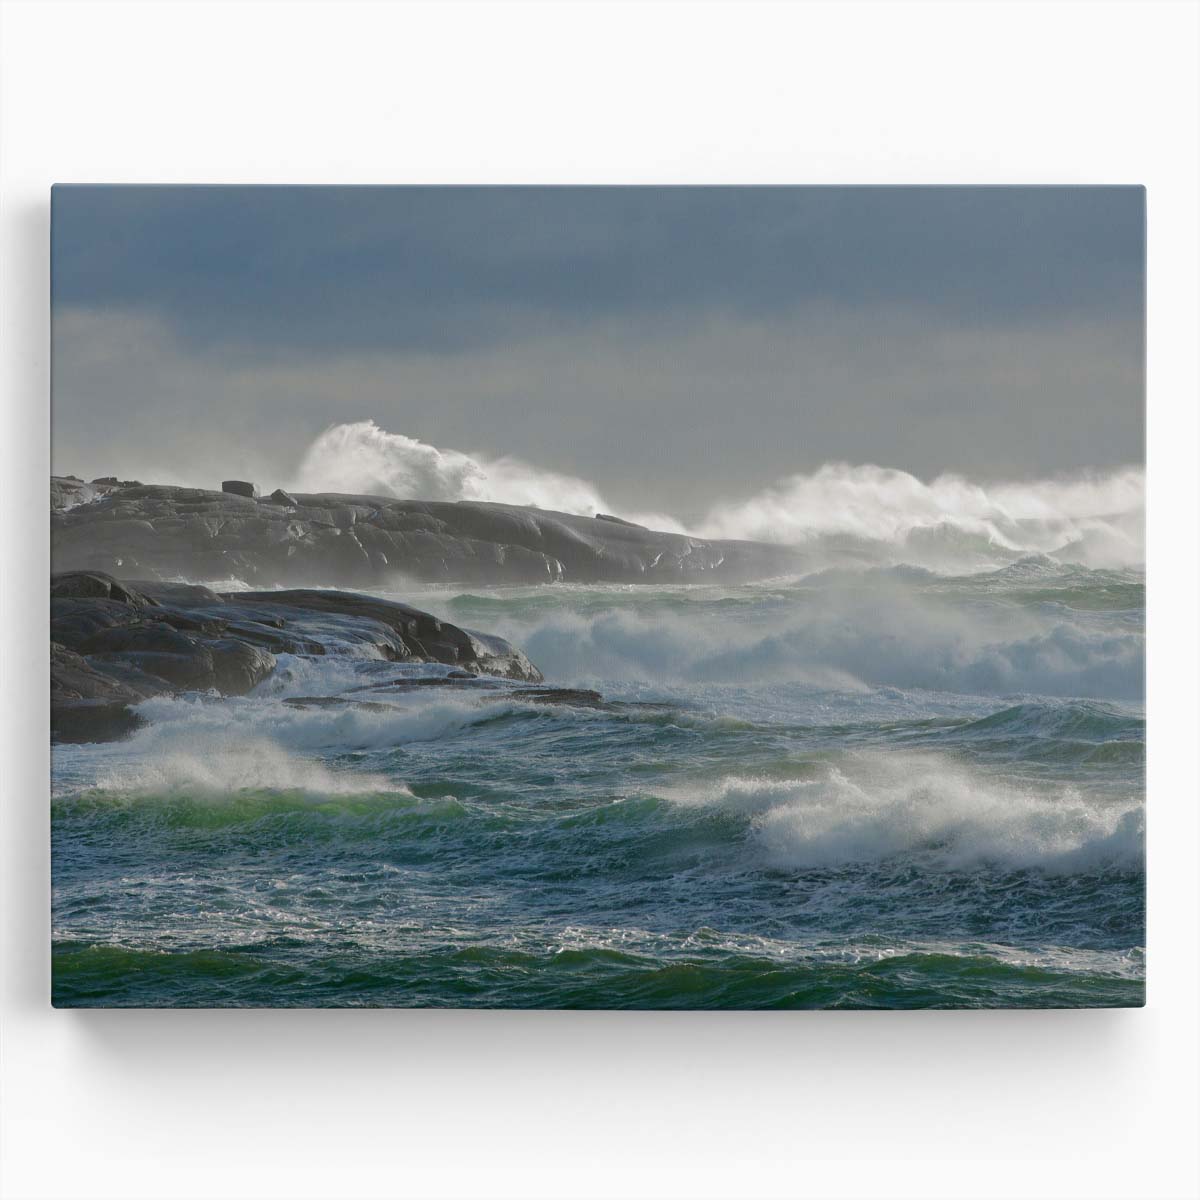 Nova Scotia Lighthouse Amidst Waves - Coastal Seascape Photography Wall Art by Luxuriance Designs. Made in USA.